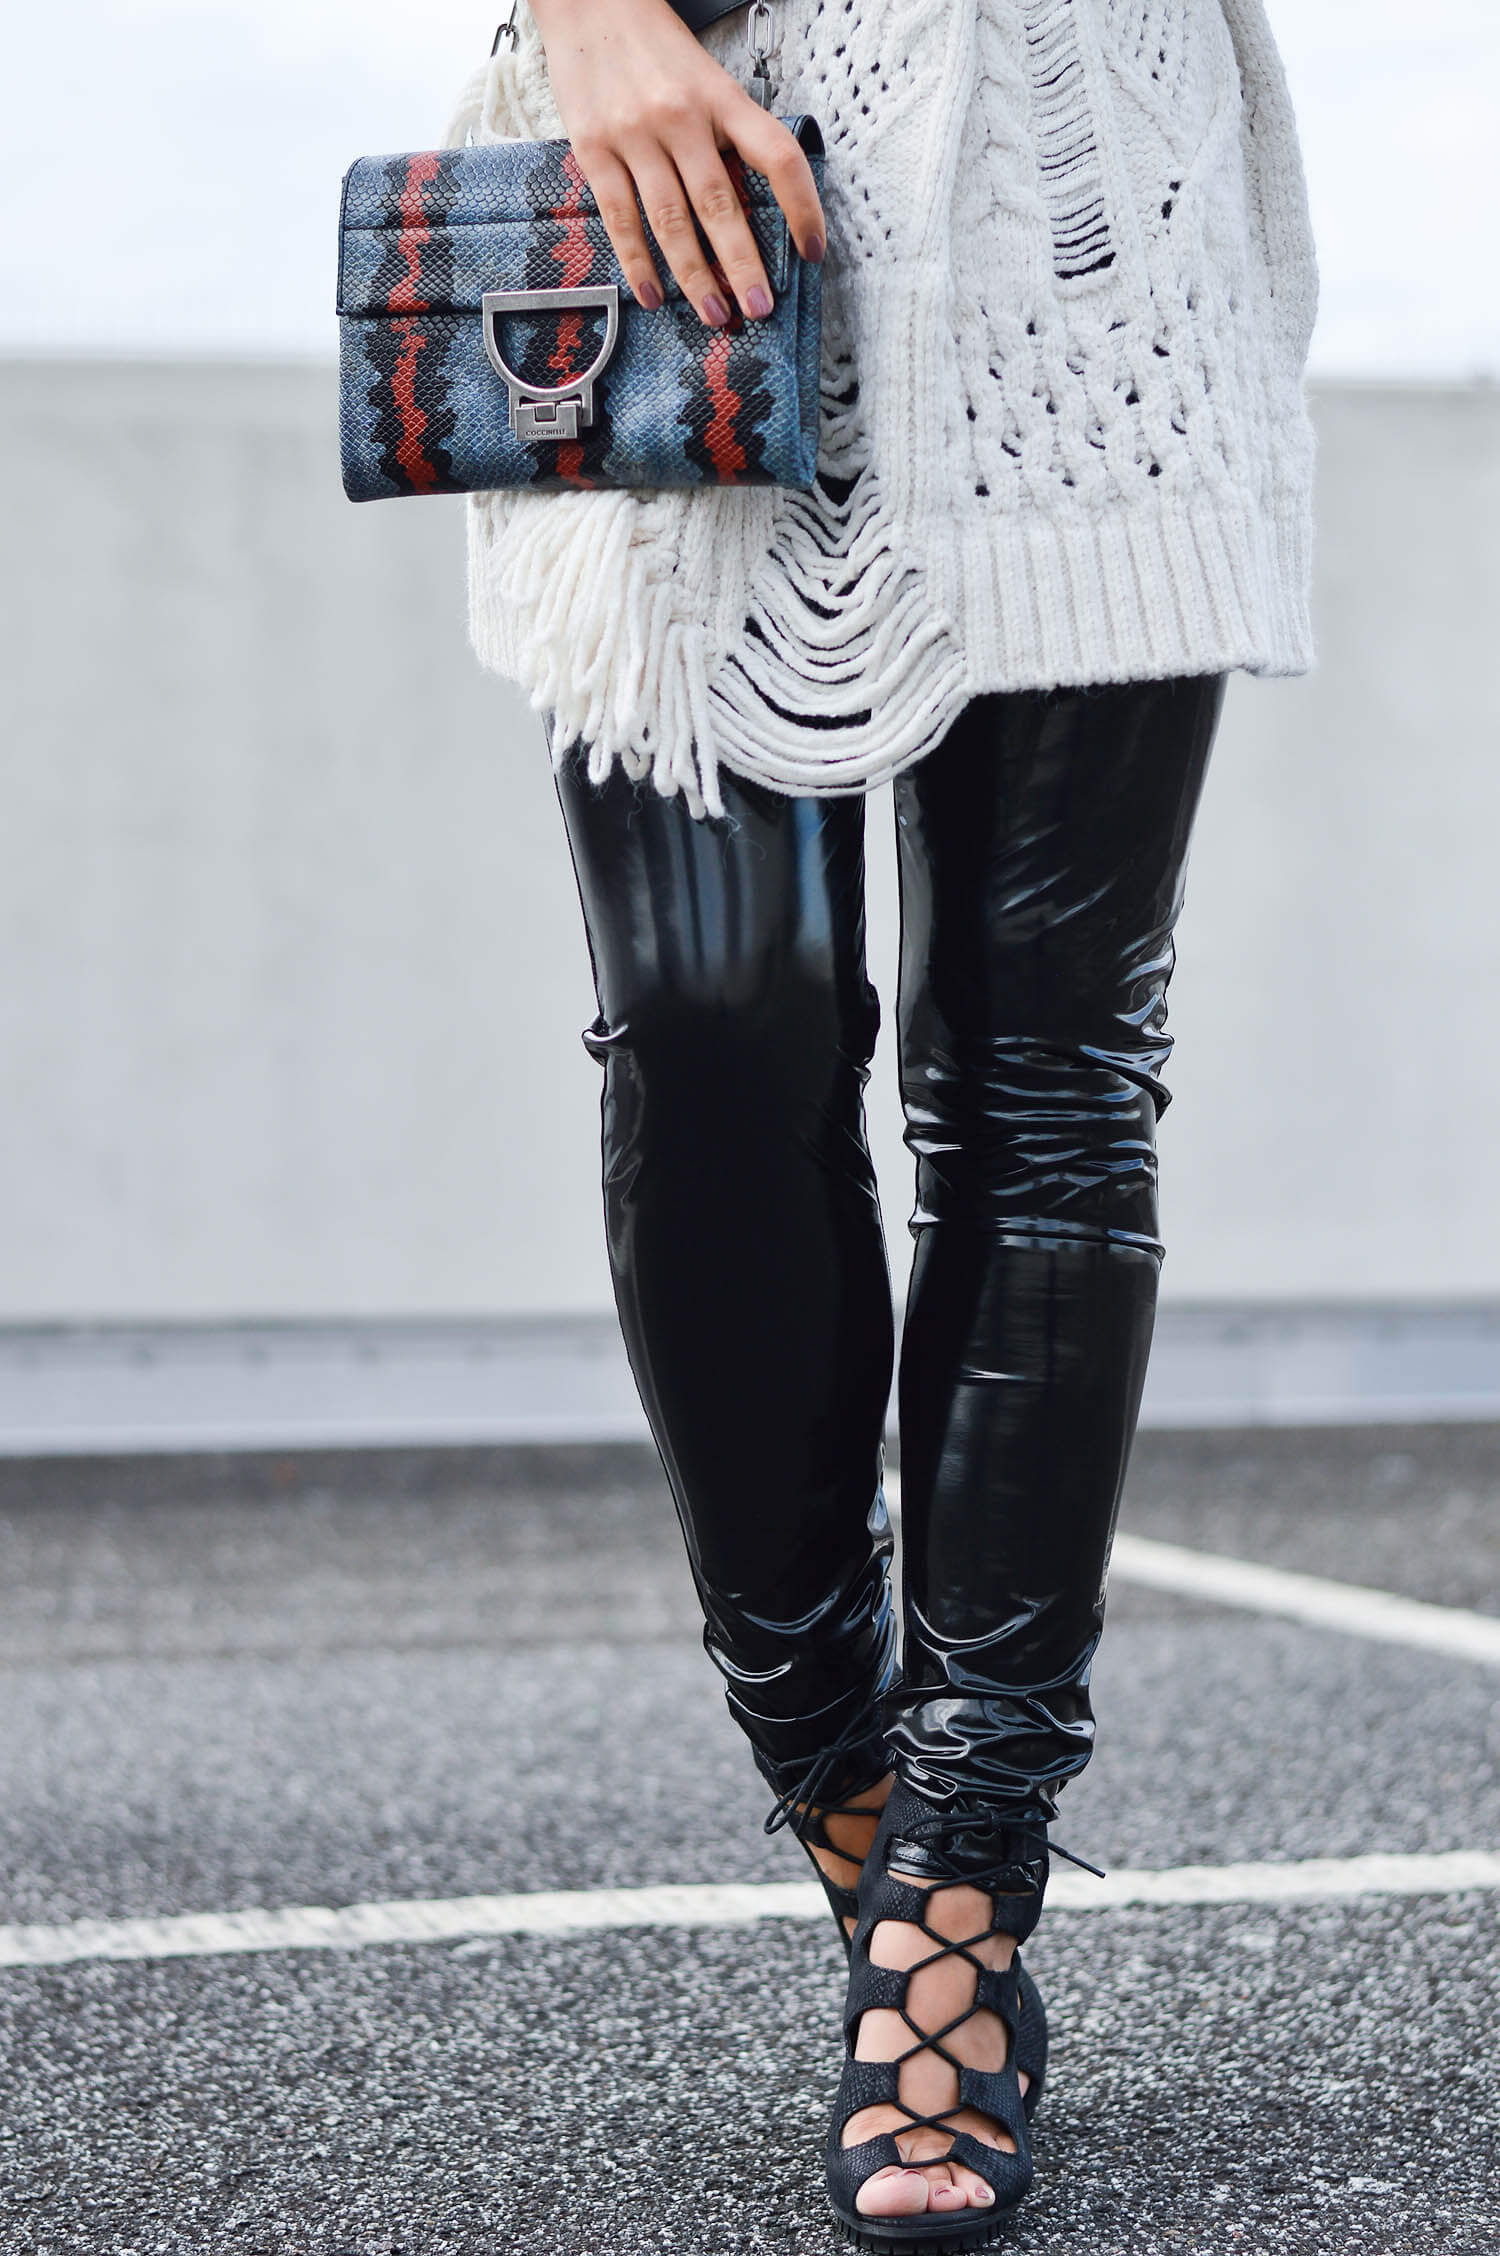 kationette-fashionblogger-nrw-Outfit-Vinyl-Pants-oversized-Zara-Knit-Coccinelle-Bag-and-Gucci-Belt